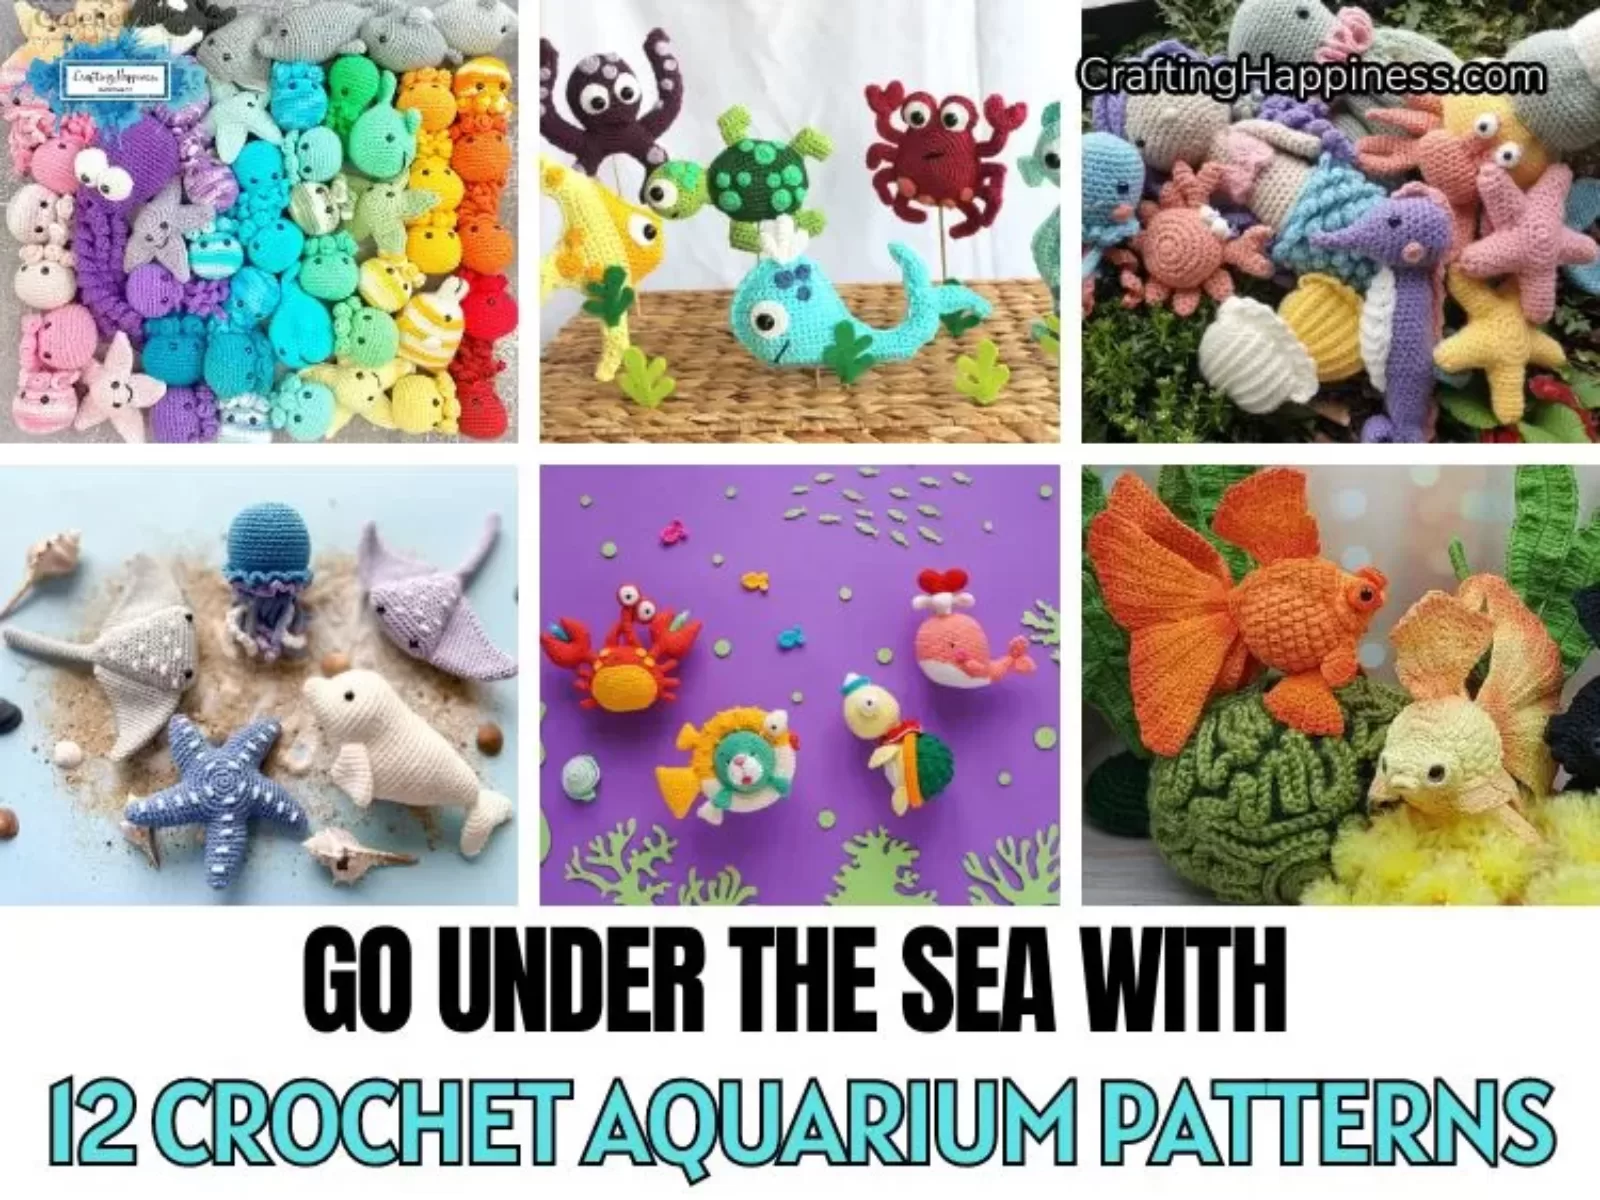 FB POSTER - Go Under The Sea With 12 Crochet Aquarium Patterns - Crafting Happiness